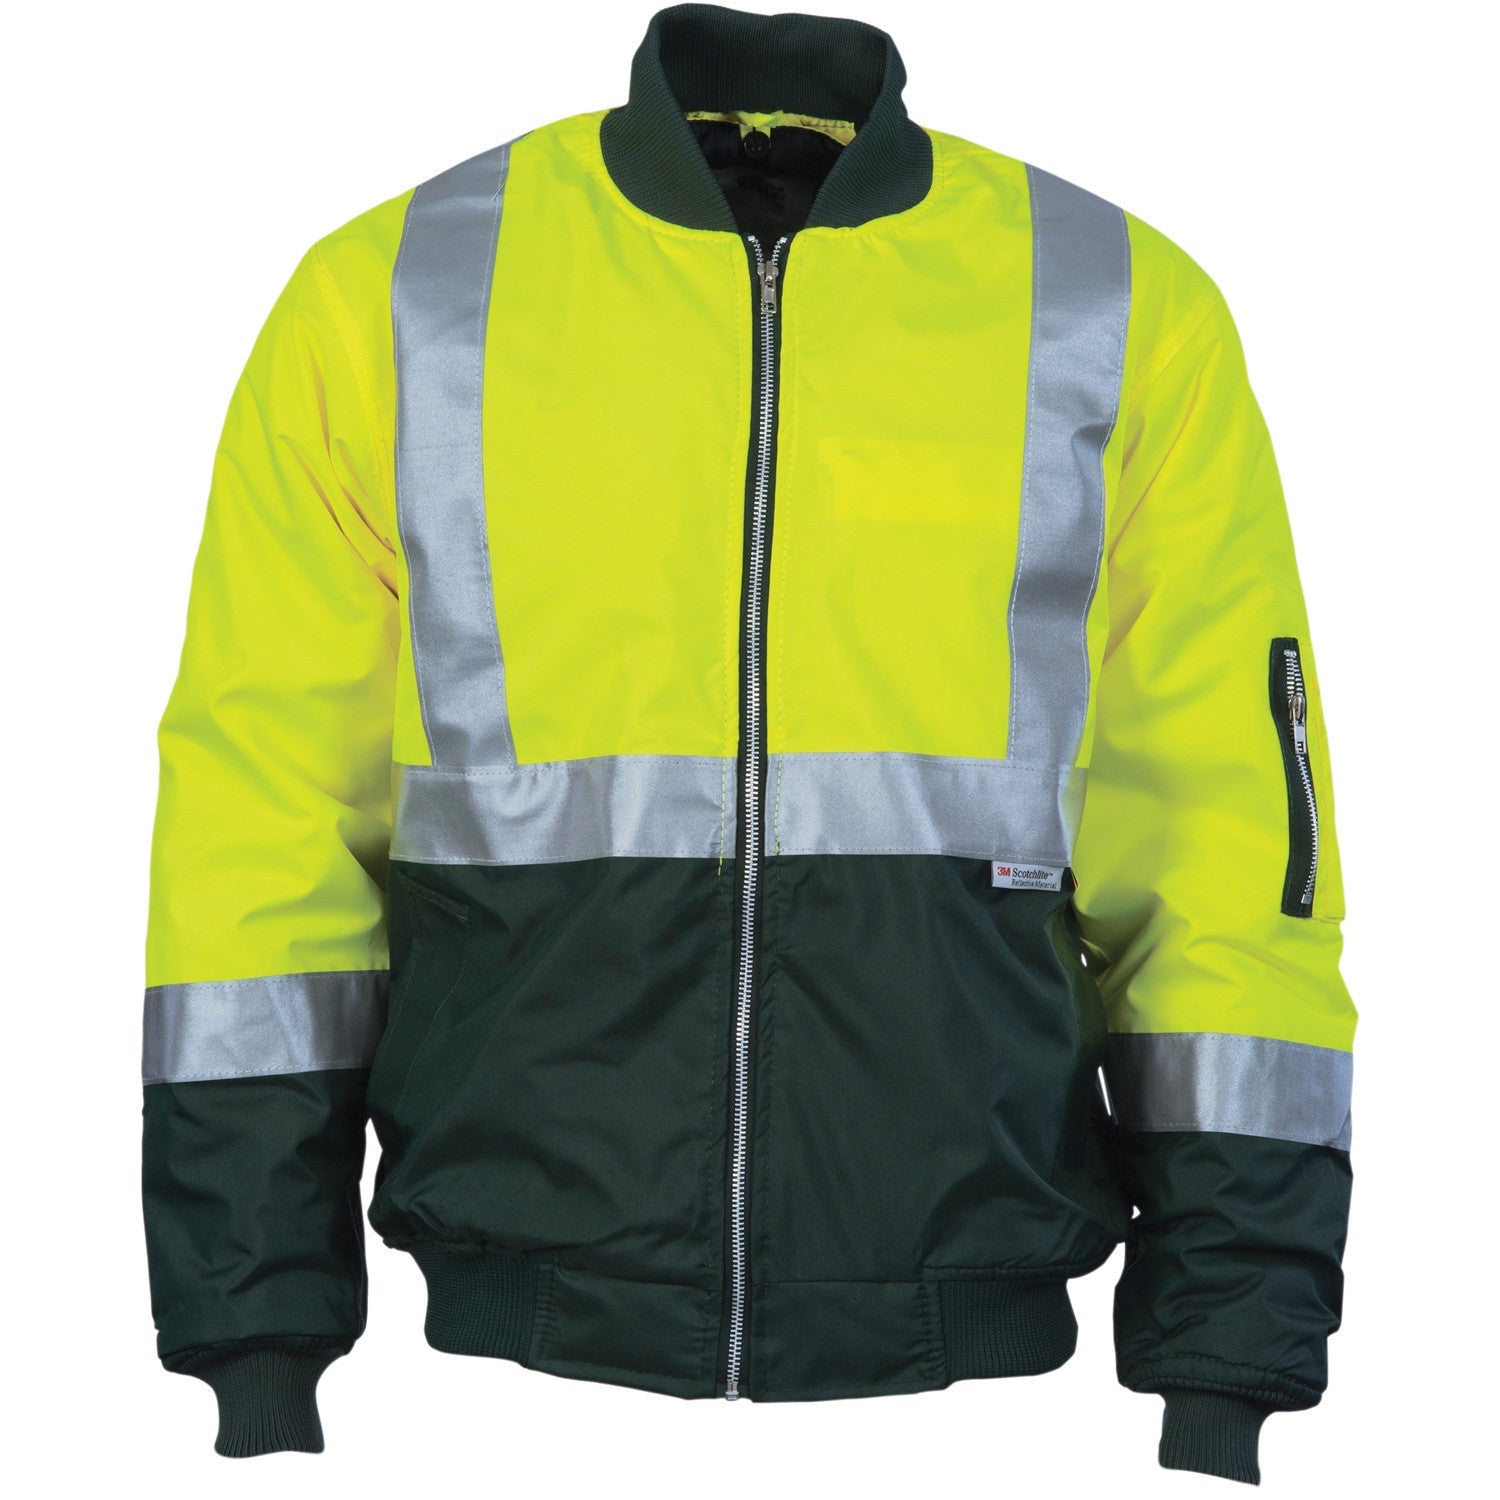 DNC Hi Vis Two Tone Flying Jacket With 3M R/Tape (3862)